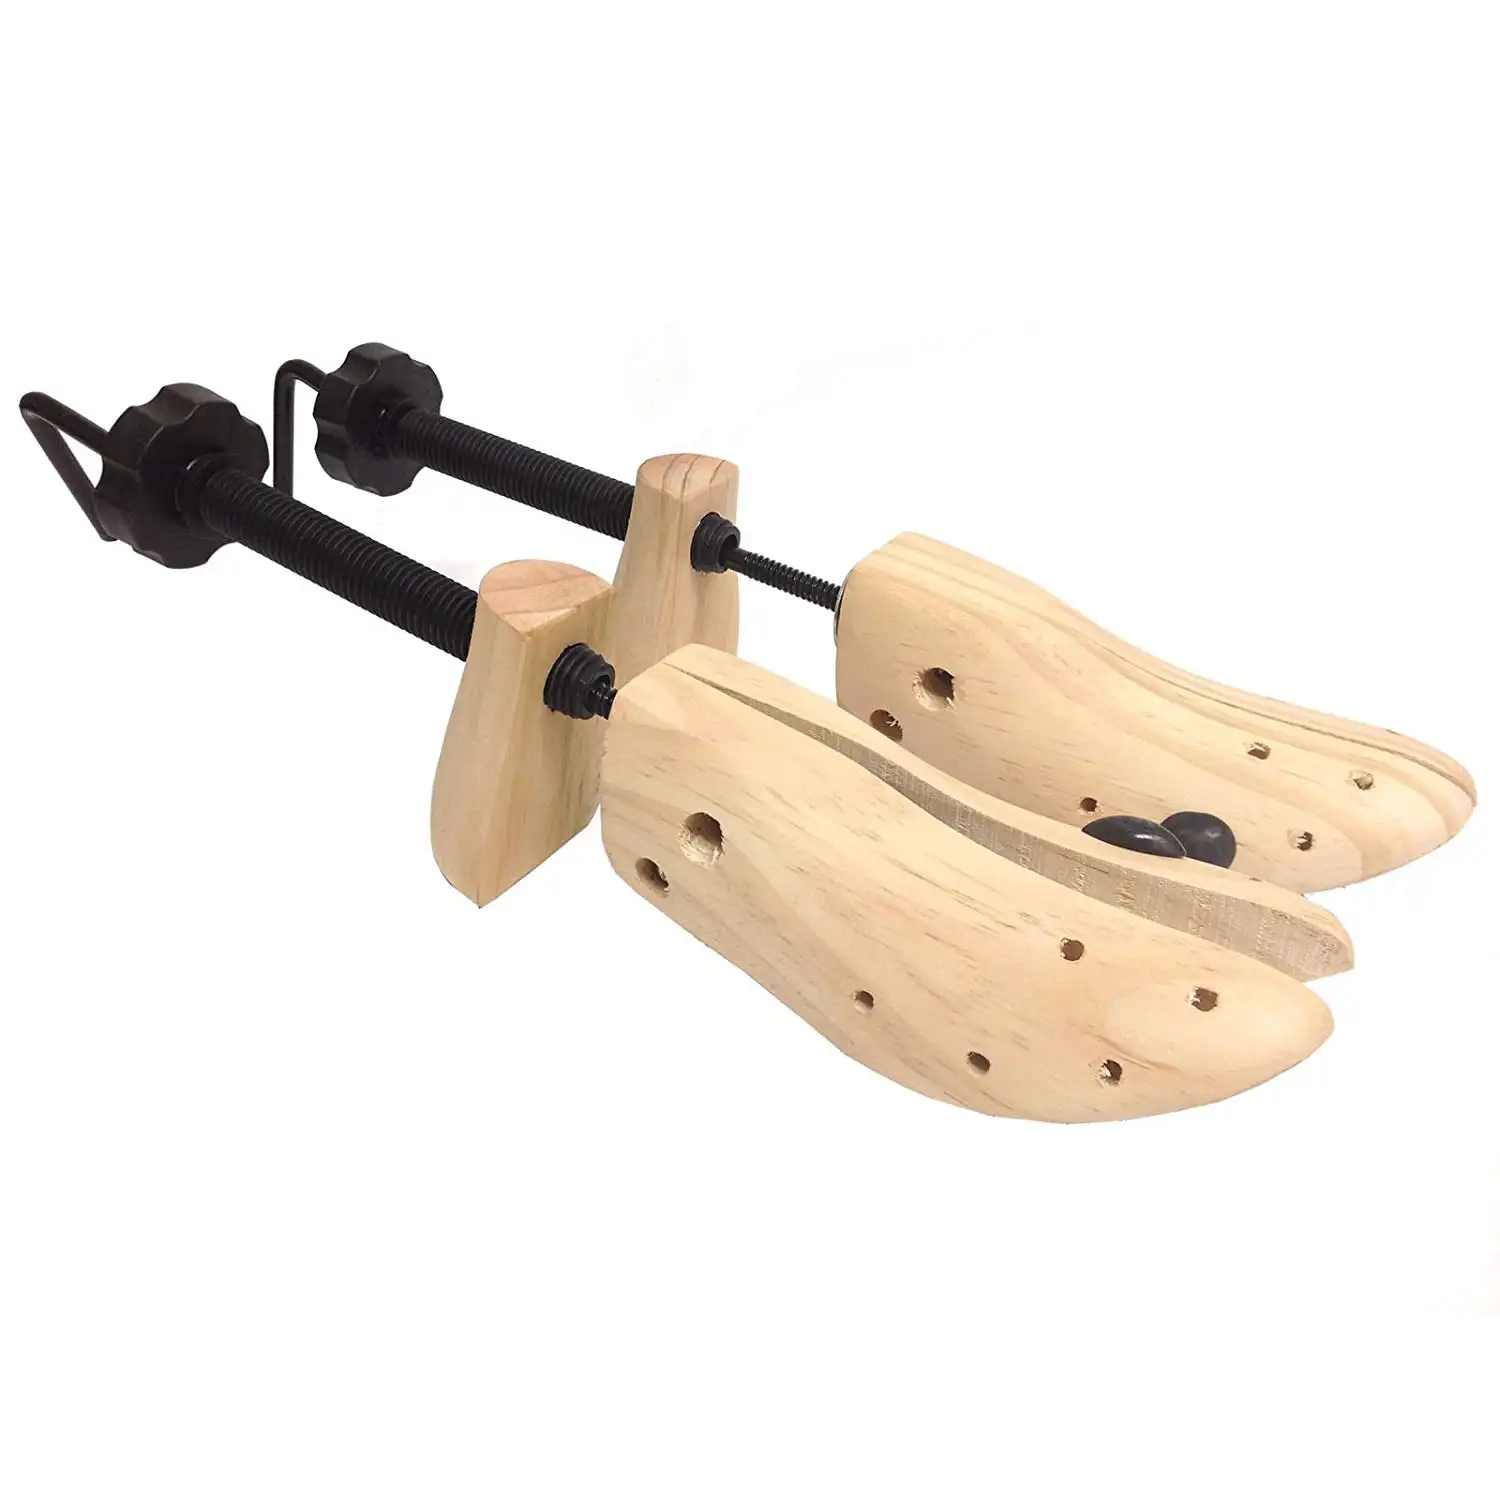 Customized  Wooden Shoe Stretcher Cedar Shoe Trees for Men Adjustable Shoe Trees for Sneakers